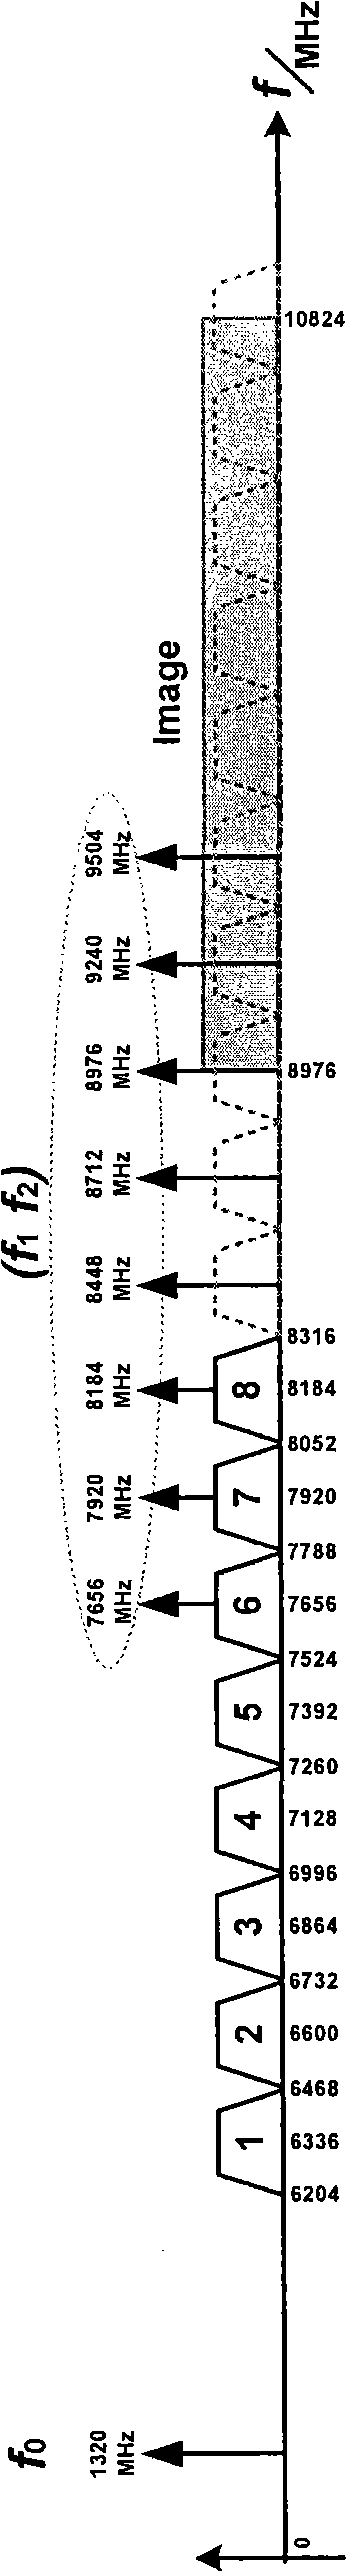 Frequency synthesizer used for 6 to 9 GHz dual-carrier orthogonal frequency division multiplexing ultra-wide band